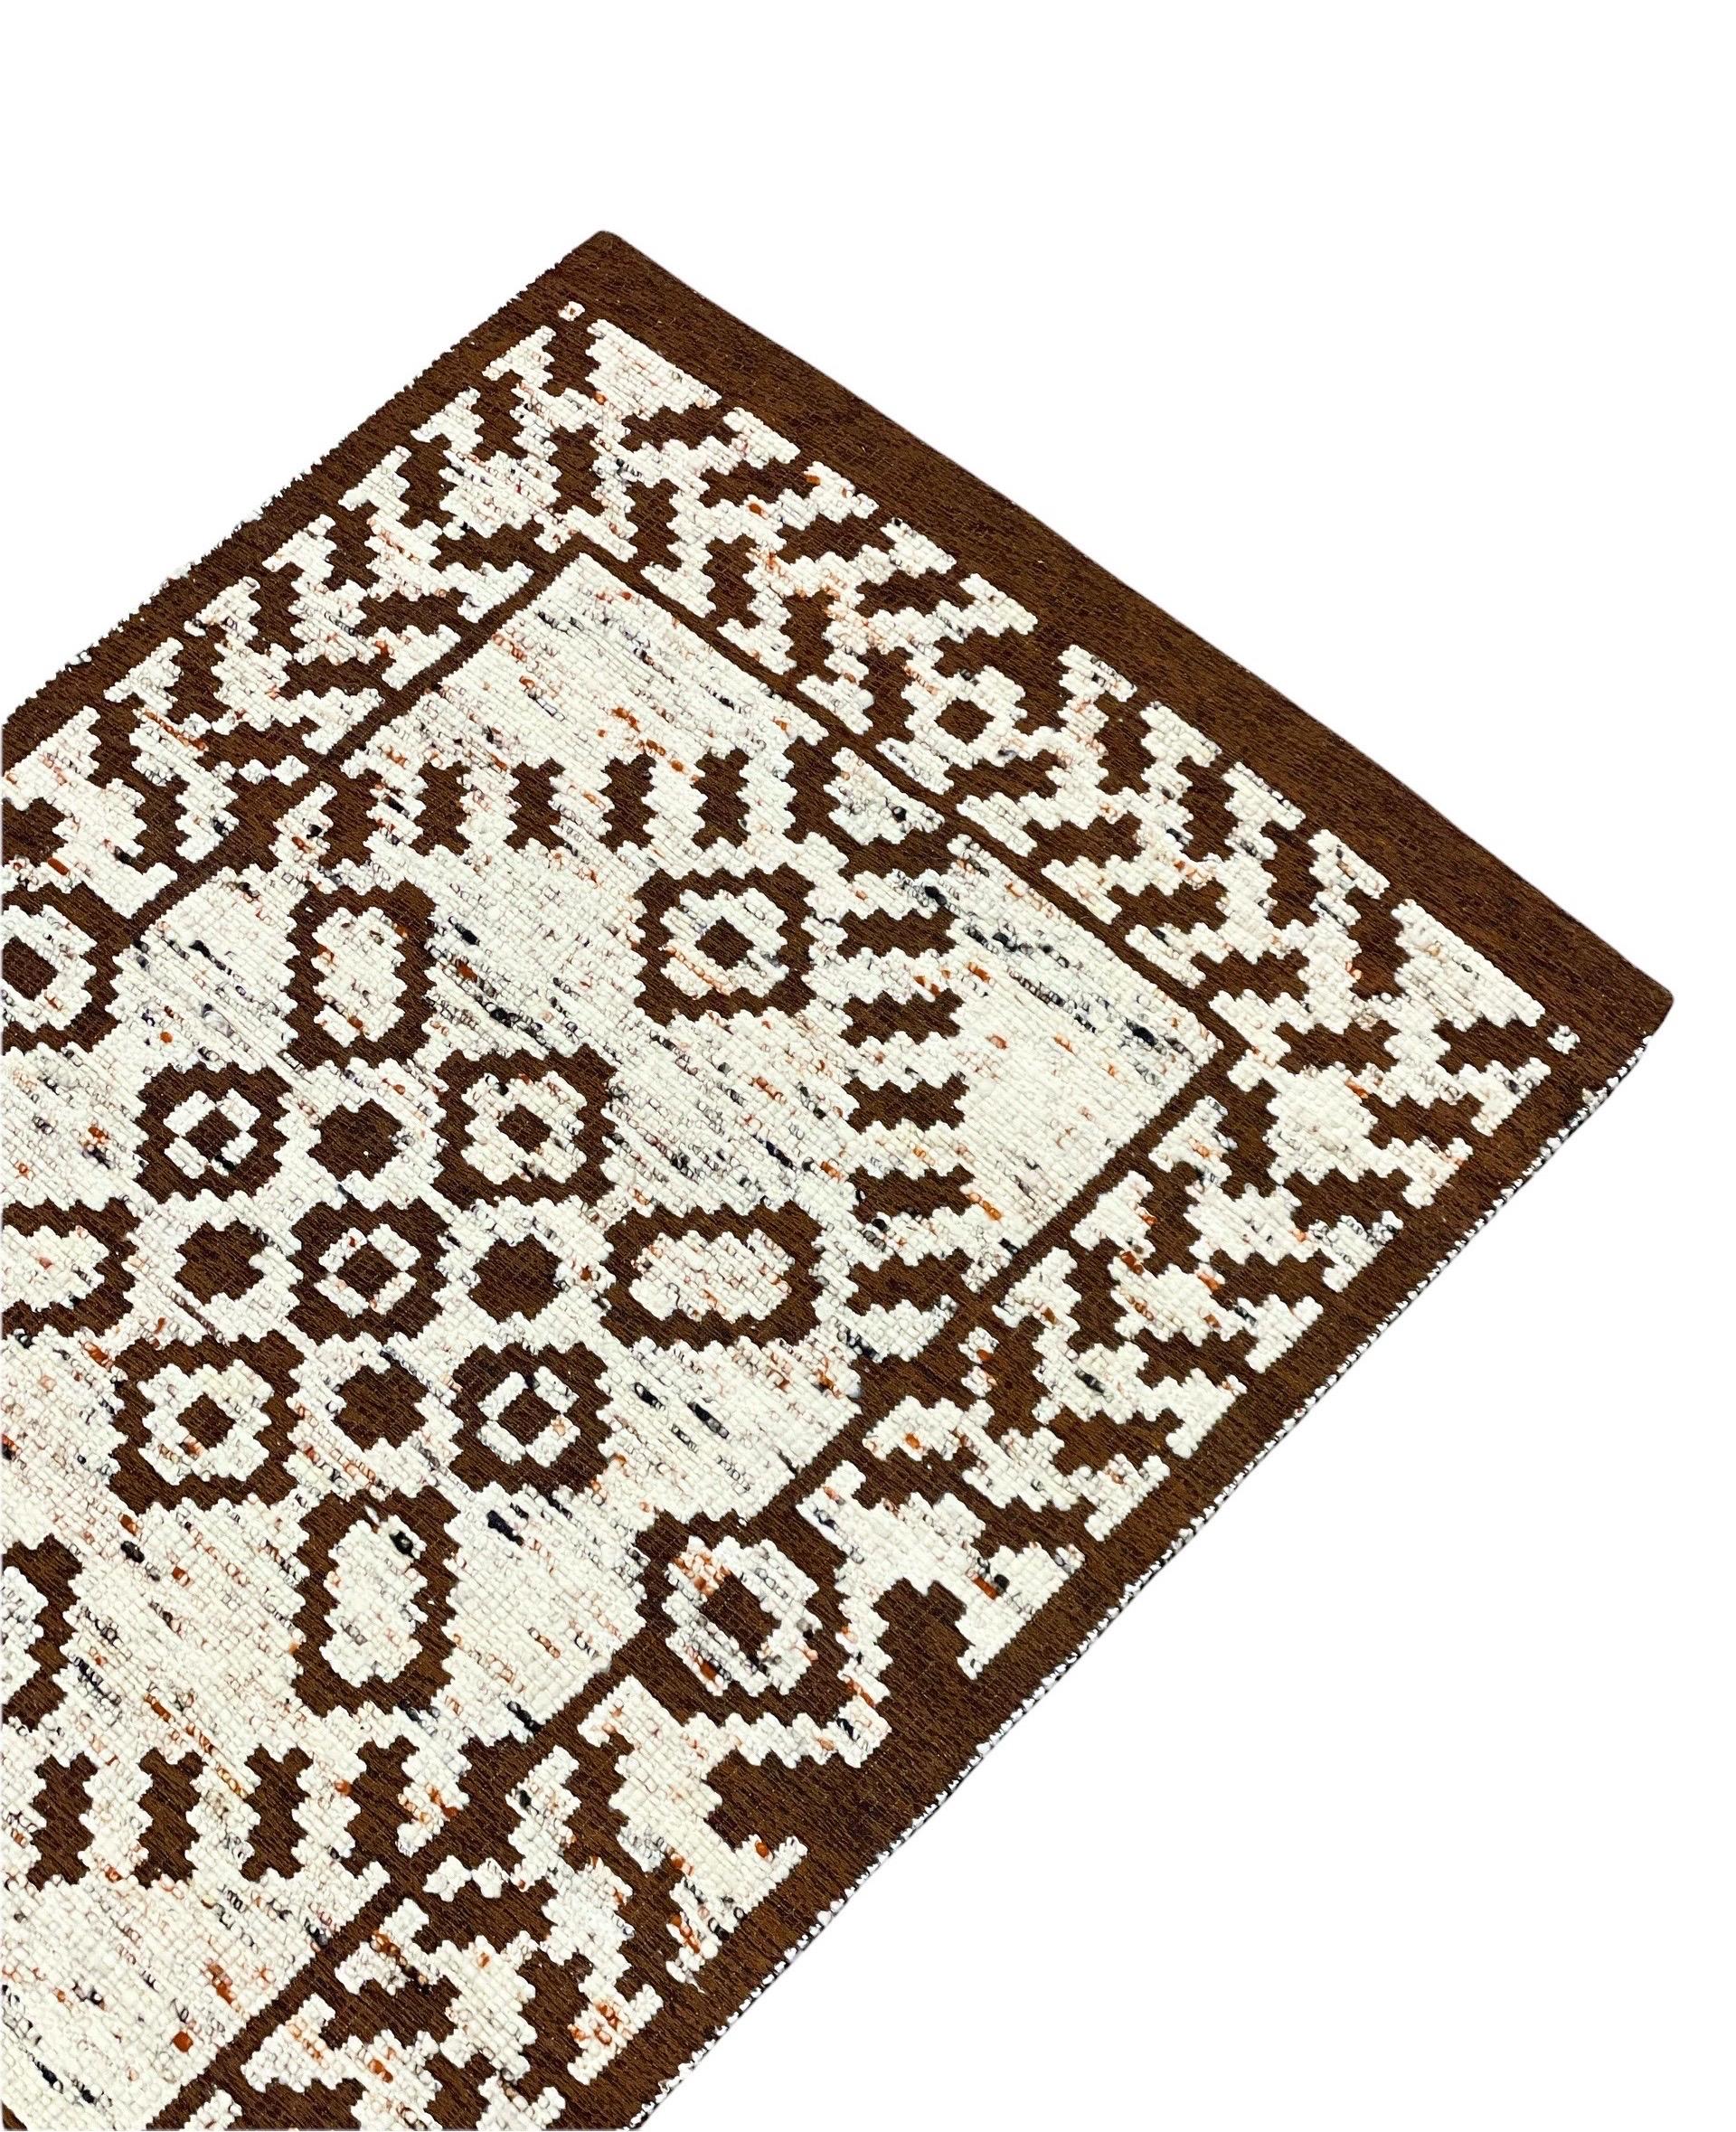 Late 20th Century Scandinavian Mid-Century Wool Rug by Astrid Sampe for Tabergs, New Old Stock For Sale